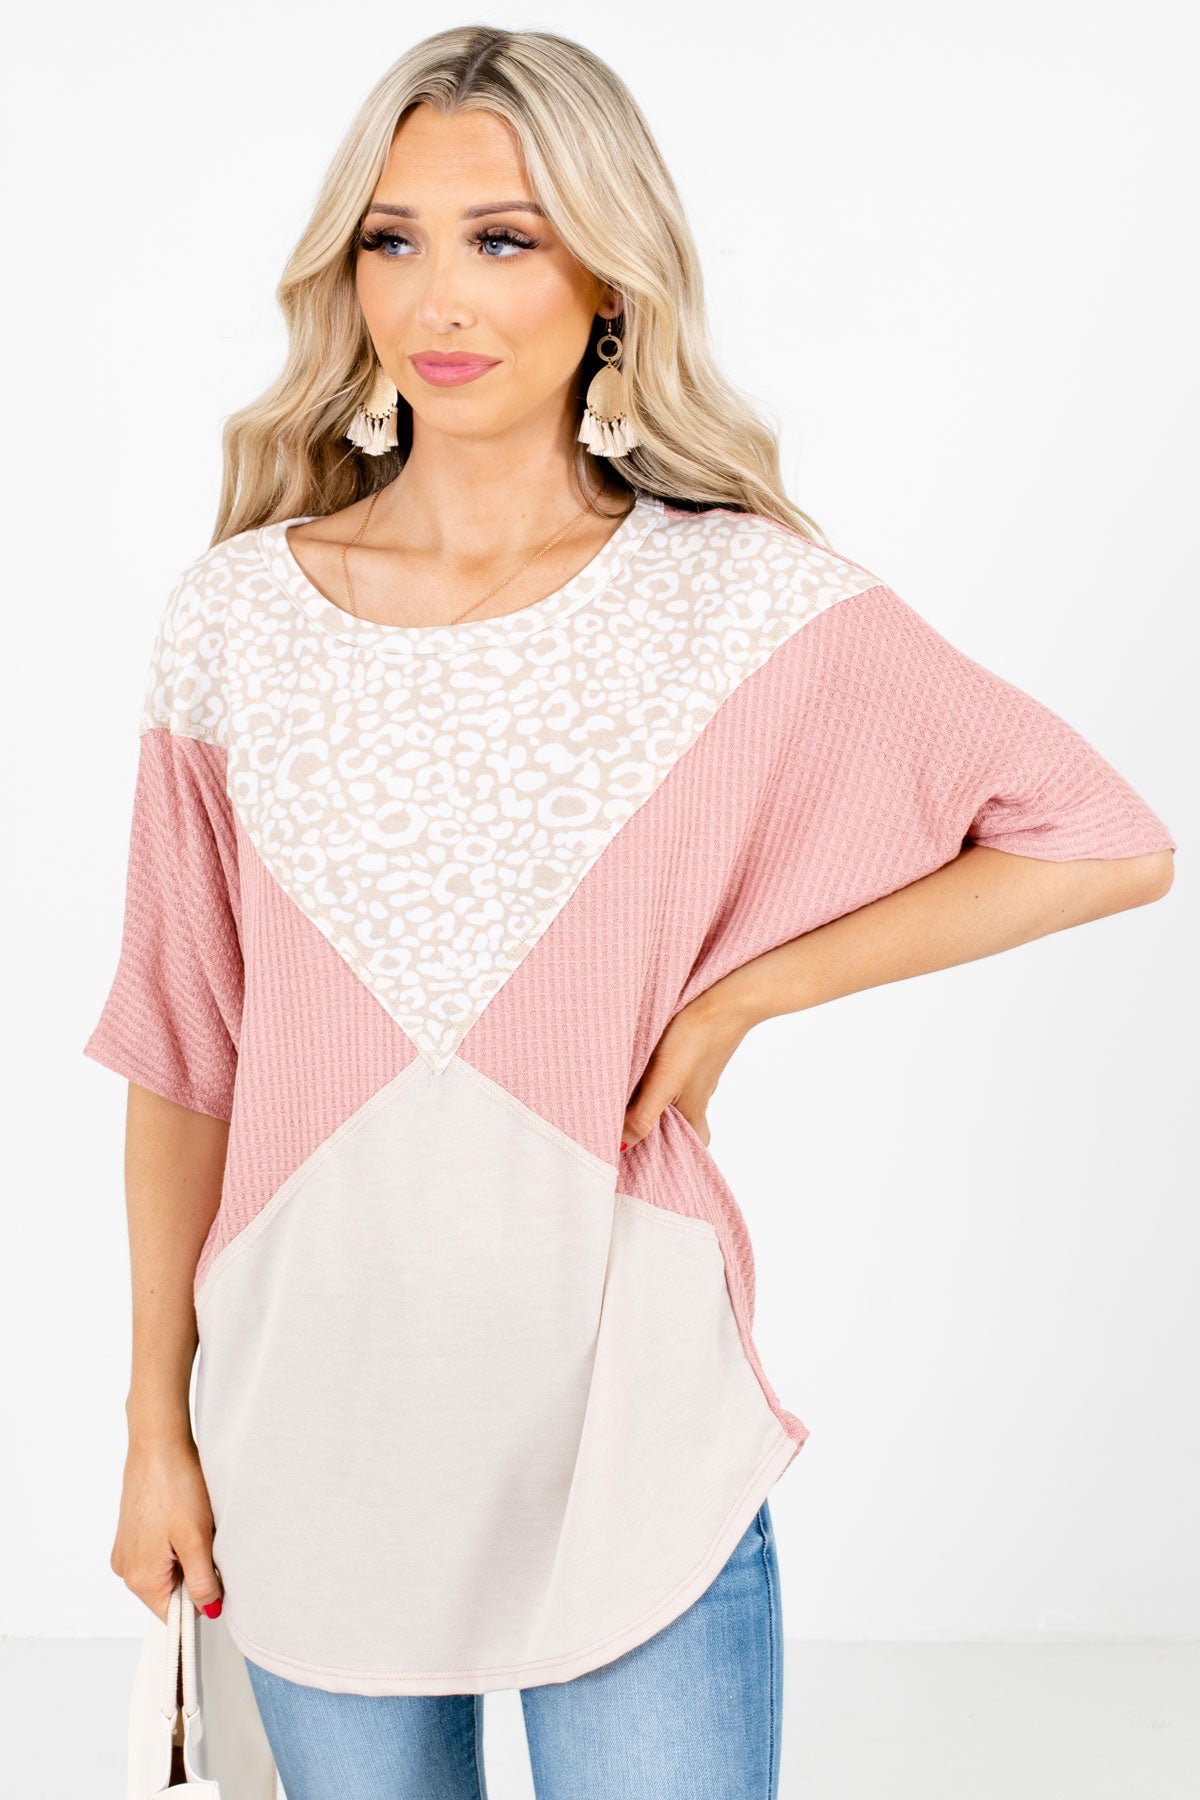 Pink High-Quality Waffle Knit Material Boutique Tops for Women